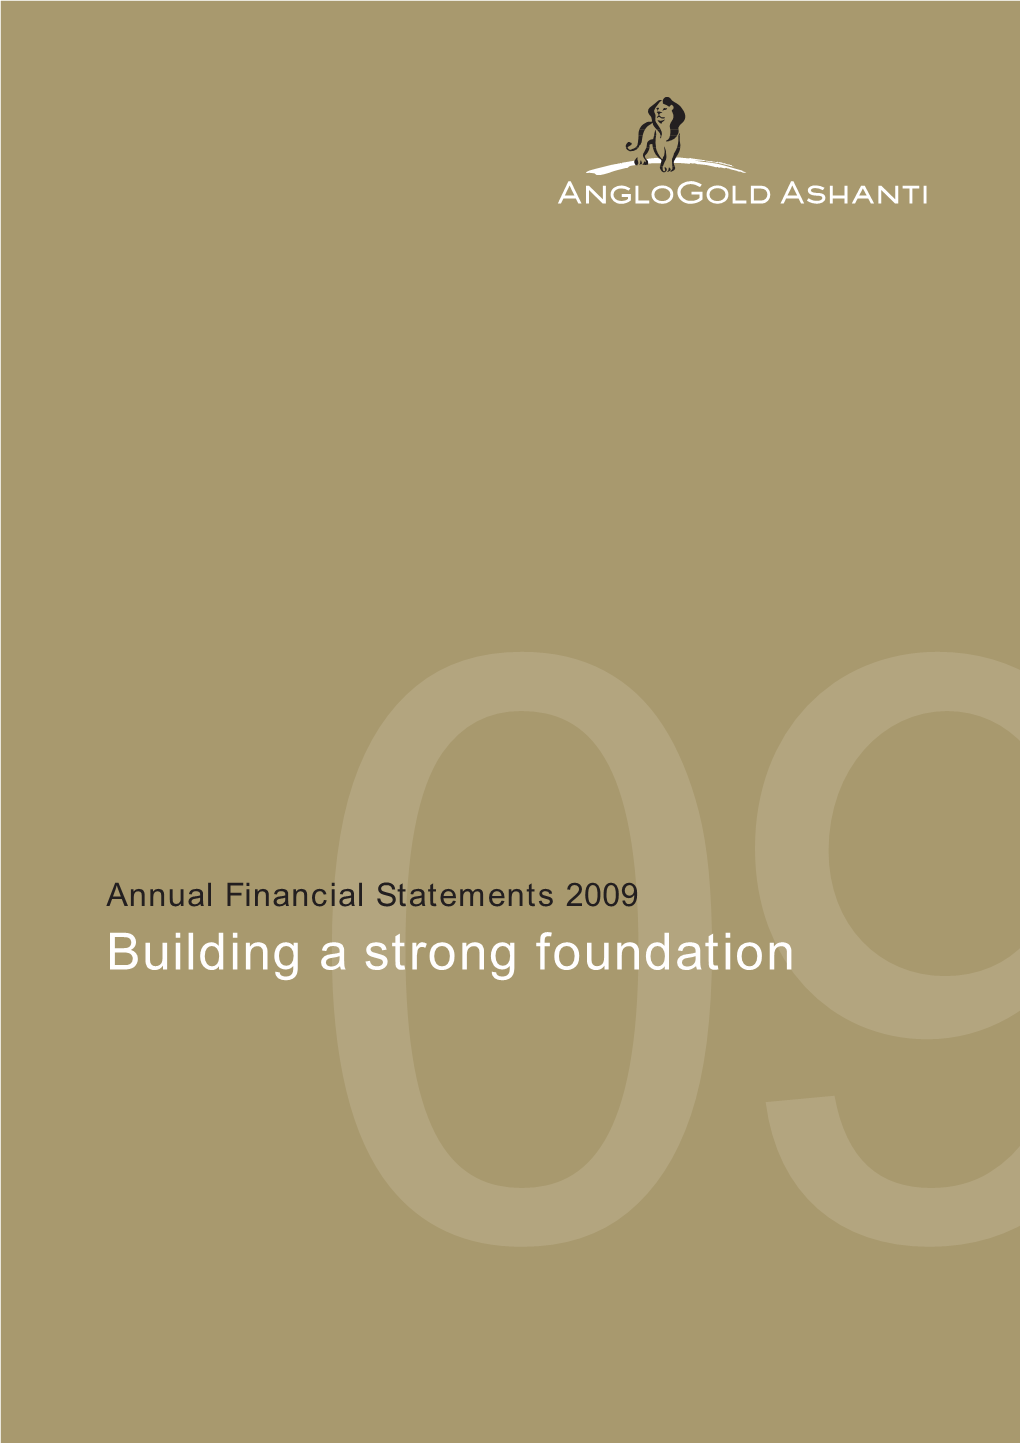 Annual Financial Statements 2009 Building09 a Strong Foundation Board of Directors